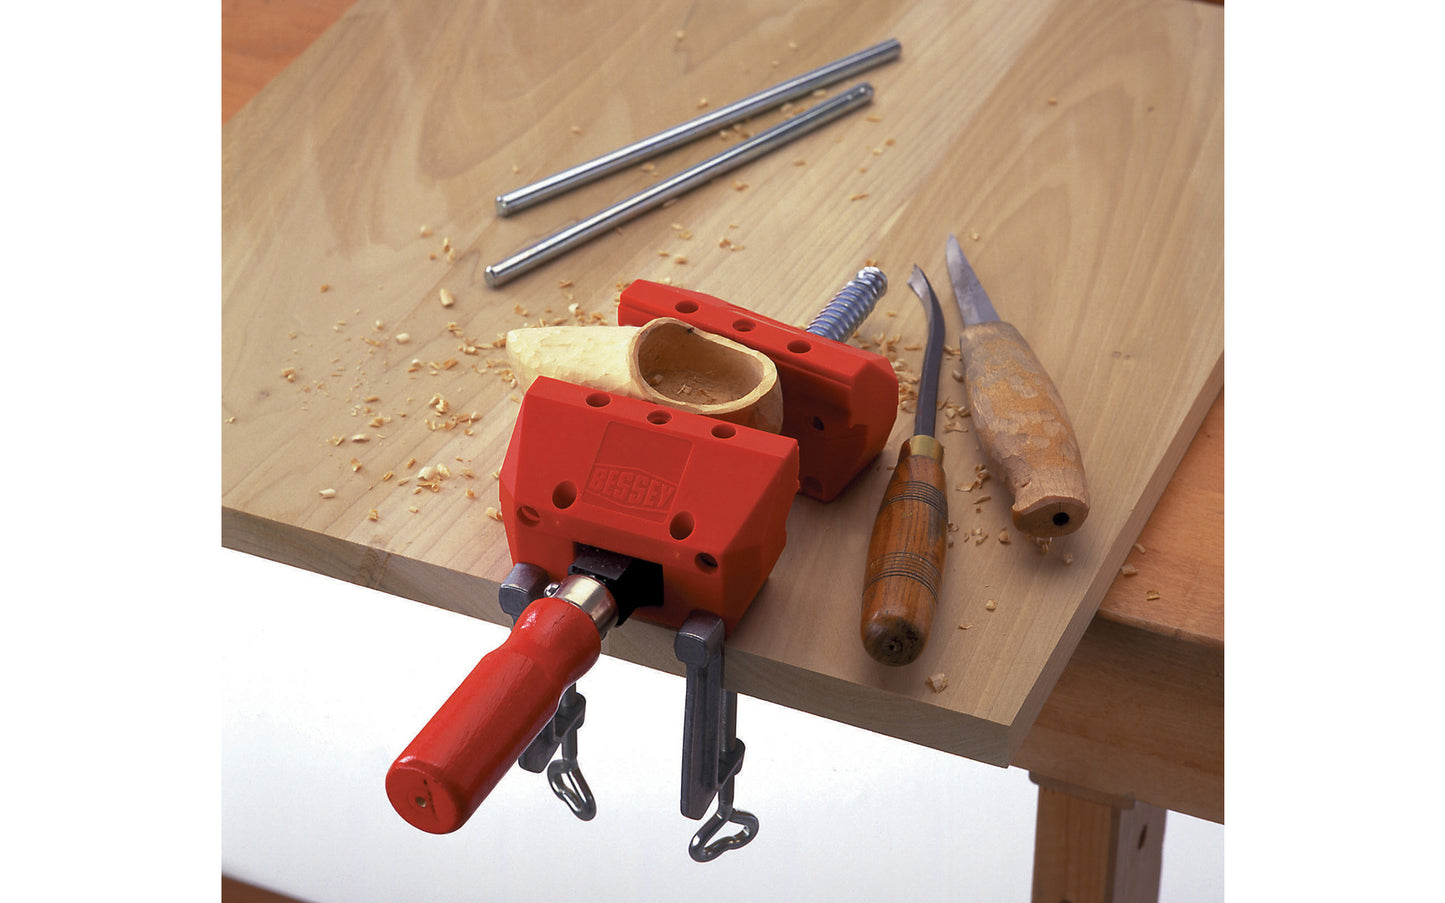 Bessey Portable Mini-Vise Clamp No. S-10 is ideal for holding round, rectangular & odd shaped objects. Non-marring plastic jaws are glue resistant. Clamping capacity up to 4". Ideal for small jobs that need parallel clamping. Can easily mount to tables & work benches. Can clamp at angles. Bessey Model S10. Mini Vise